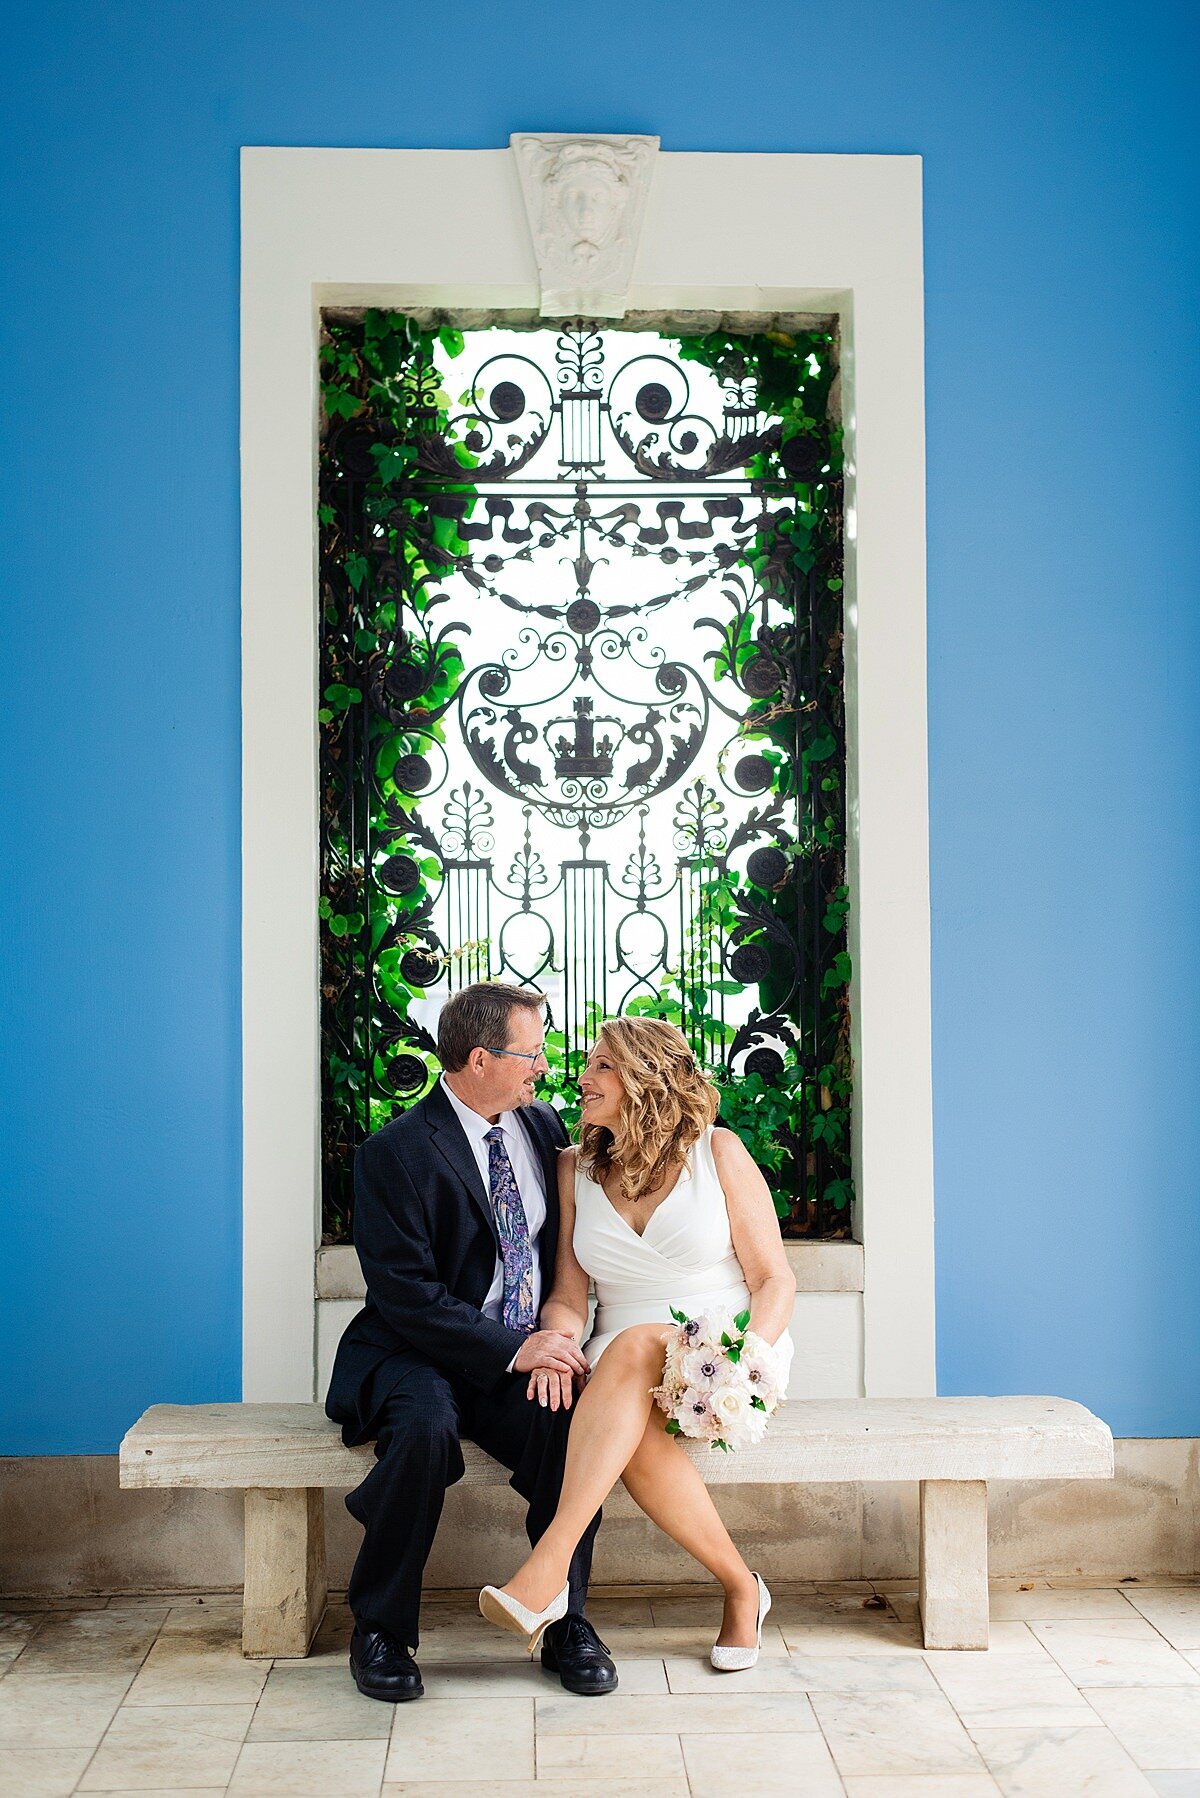 Set against a bright blue backdrop the bride and groom sit on a white stone bench in front of a window with climbing ivy and a decorative black window grate. The window is outlined in white. The bride and groom, at Cheekwood, are holding hands and looking into each other's eyes. The groom is wearing a navy suit with a white shirt and blue tie. The bride is wearing white heels with a short, fitted white dress with a v-neckline. She is holding a bouquet of white and blush flowers.